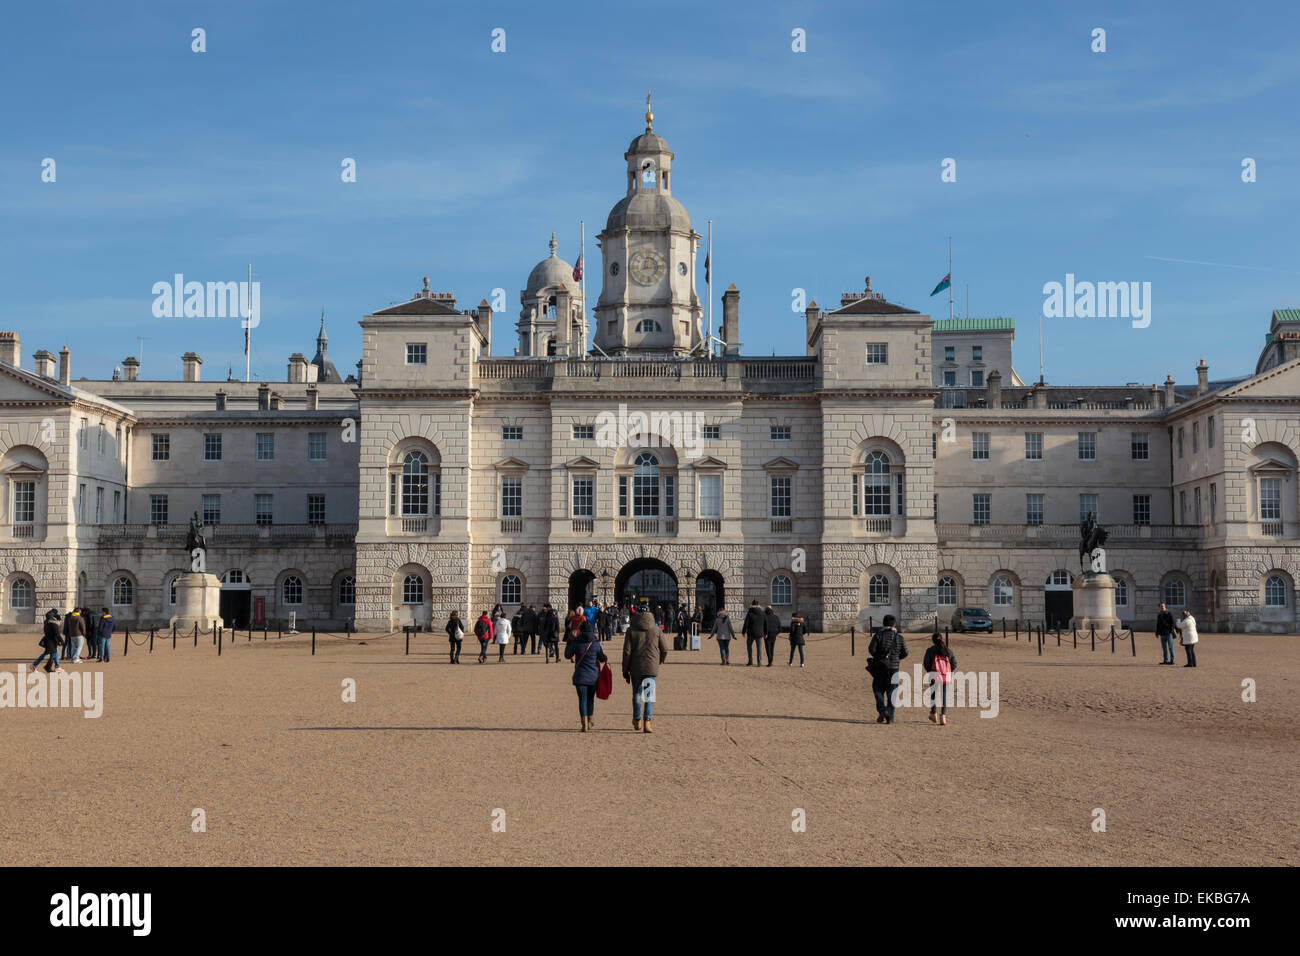 Tourists walk towards the arch of Horse Guards Parade under a winter's blue sky, Whitehall, London, England, United Kingdom Stock Photo